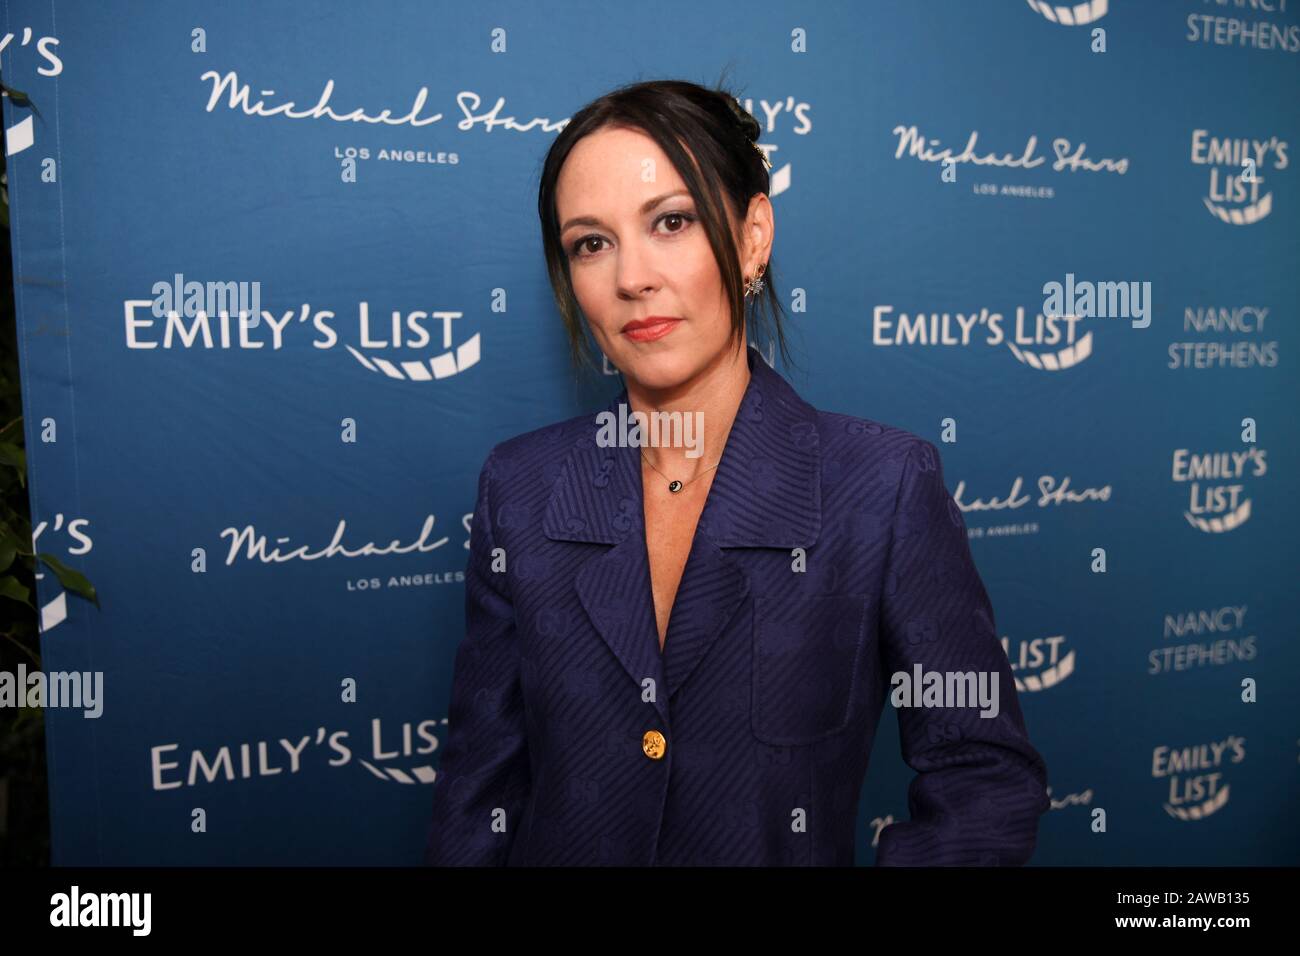 Amanda Shires attends EMILY’s List Pre-Oscars panel discussion titled “Defining Women” on February 4th, 2020 in Los Angeles, California. Stock Photo